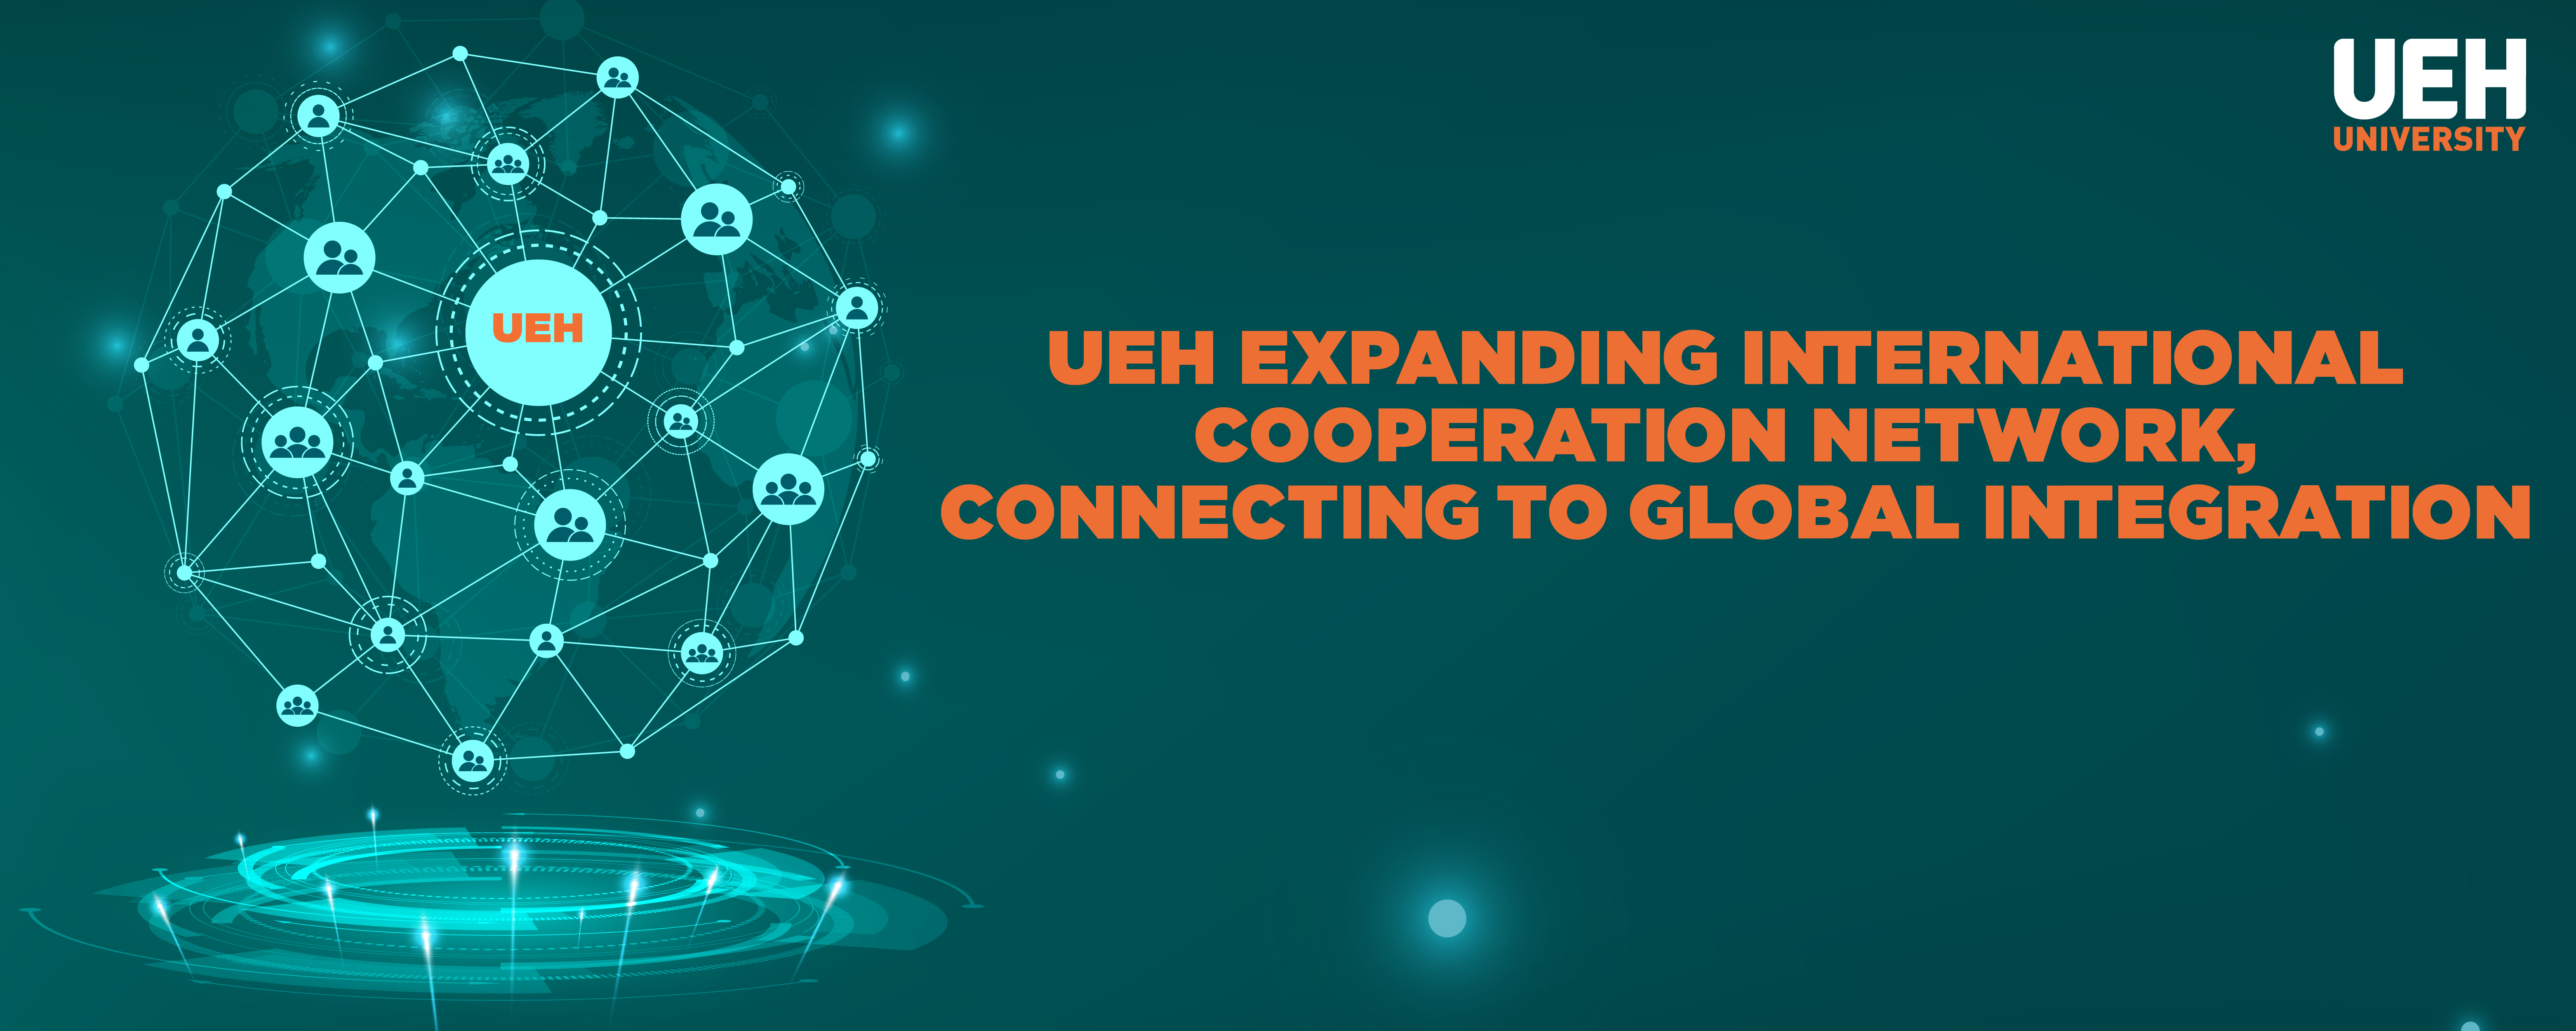 UEH expanding the international cooperation network connecting to global integration